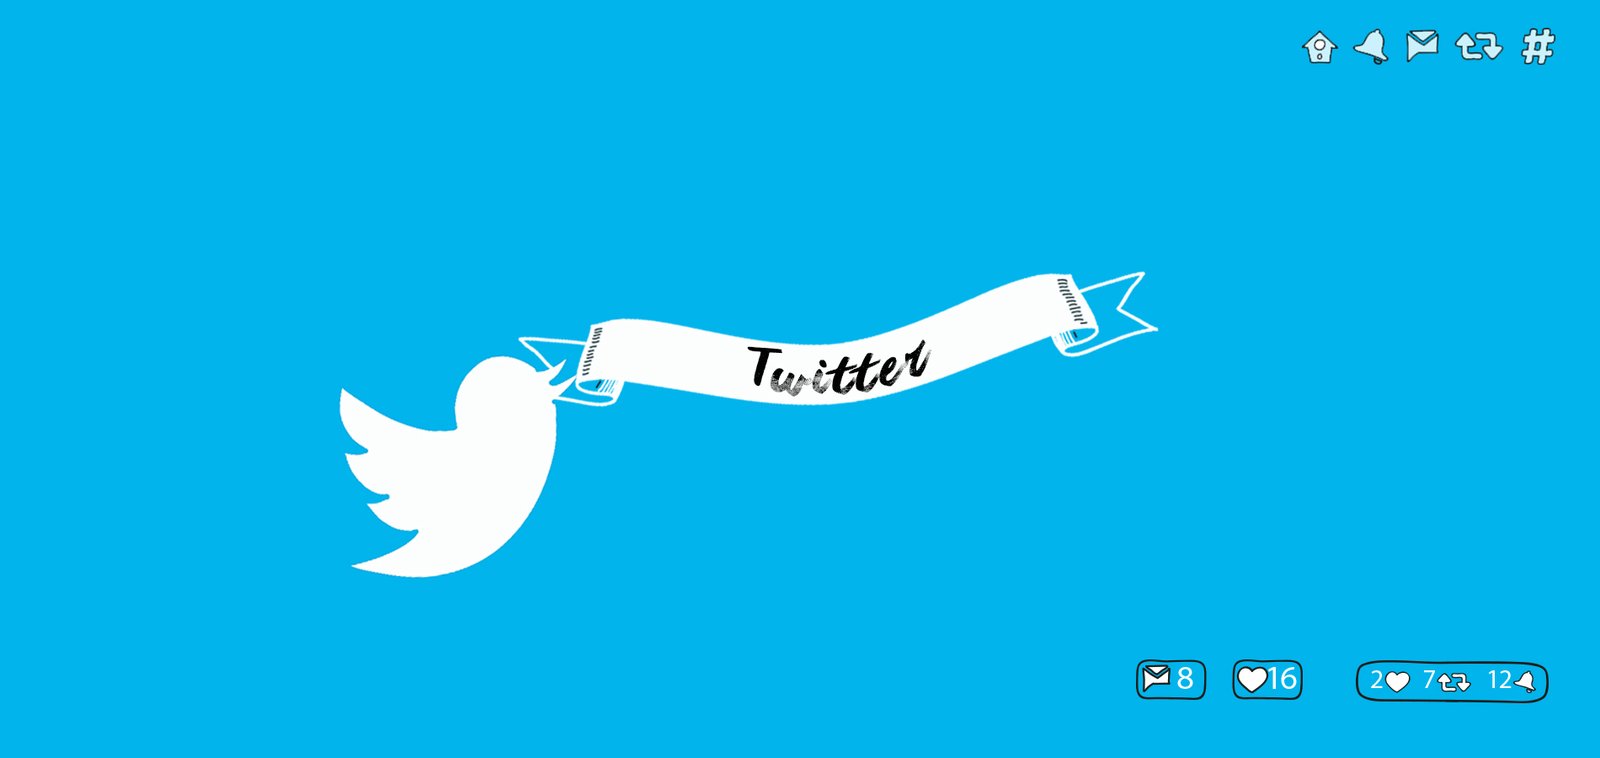 5 Best Ways To Amplify Your Business Through Twitter